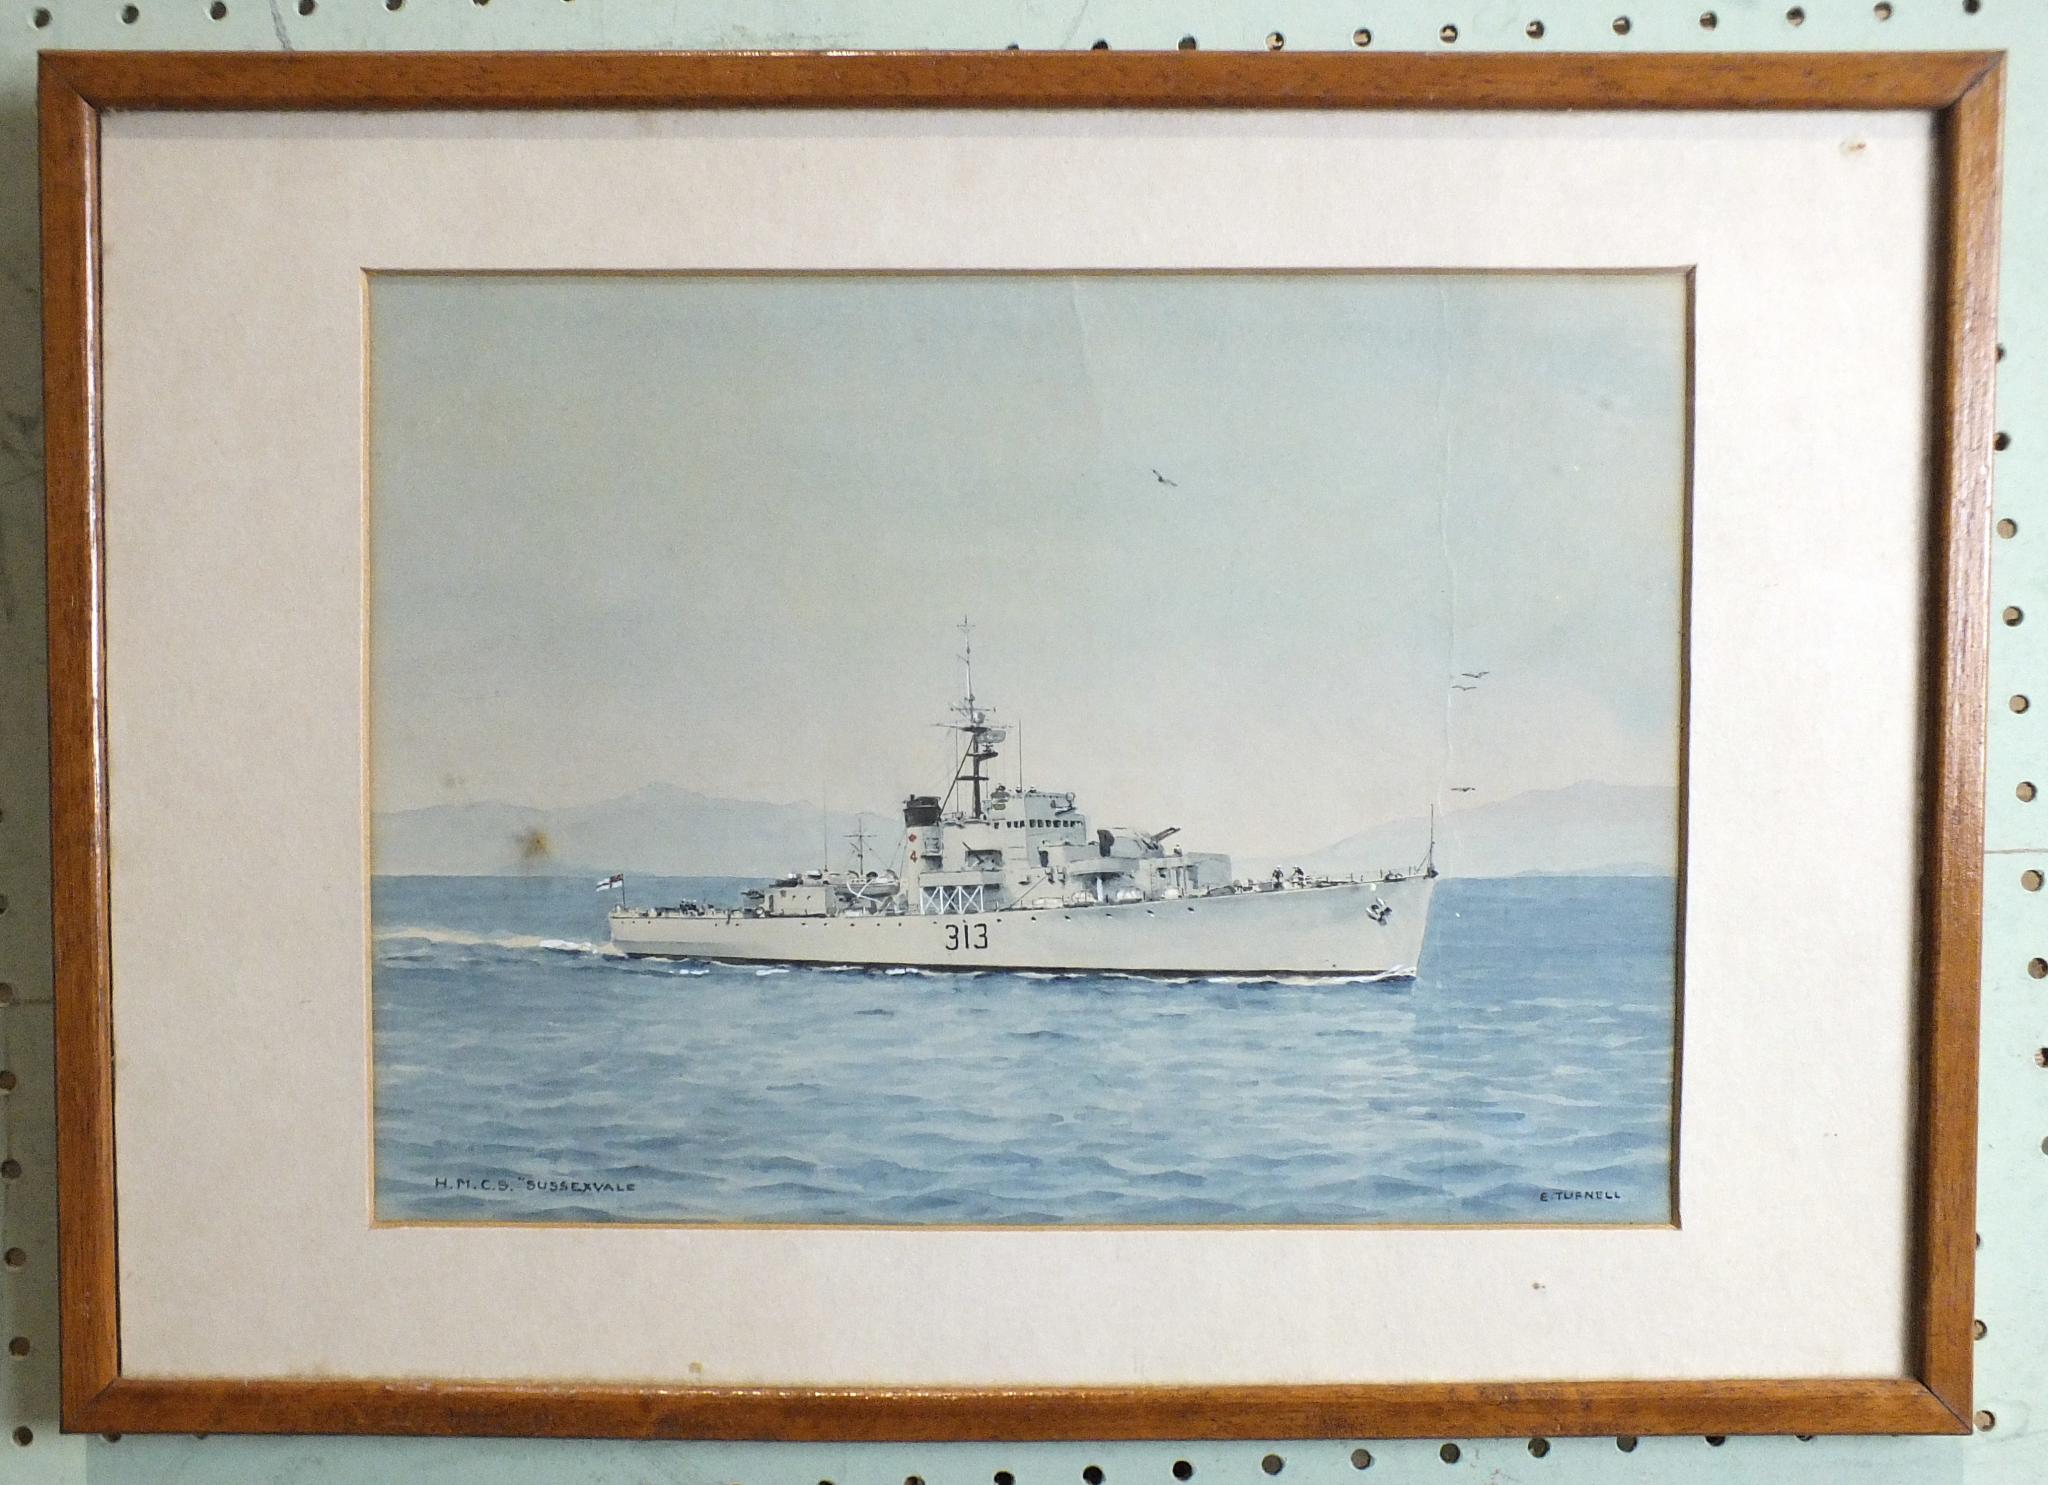 •Cdr Eric Erskine Campbell Tufnell RN (1888-1973) HMCS SUSSEXVALE OFF THE COAST Watercolour,